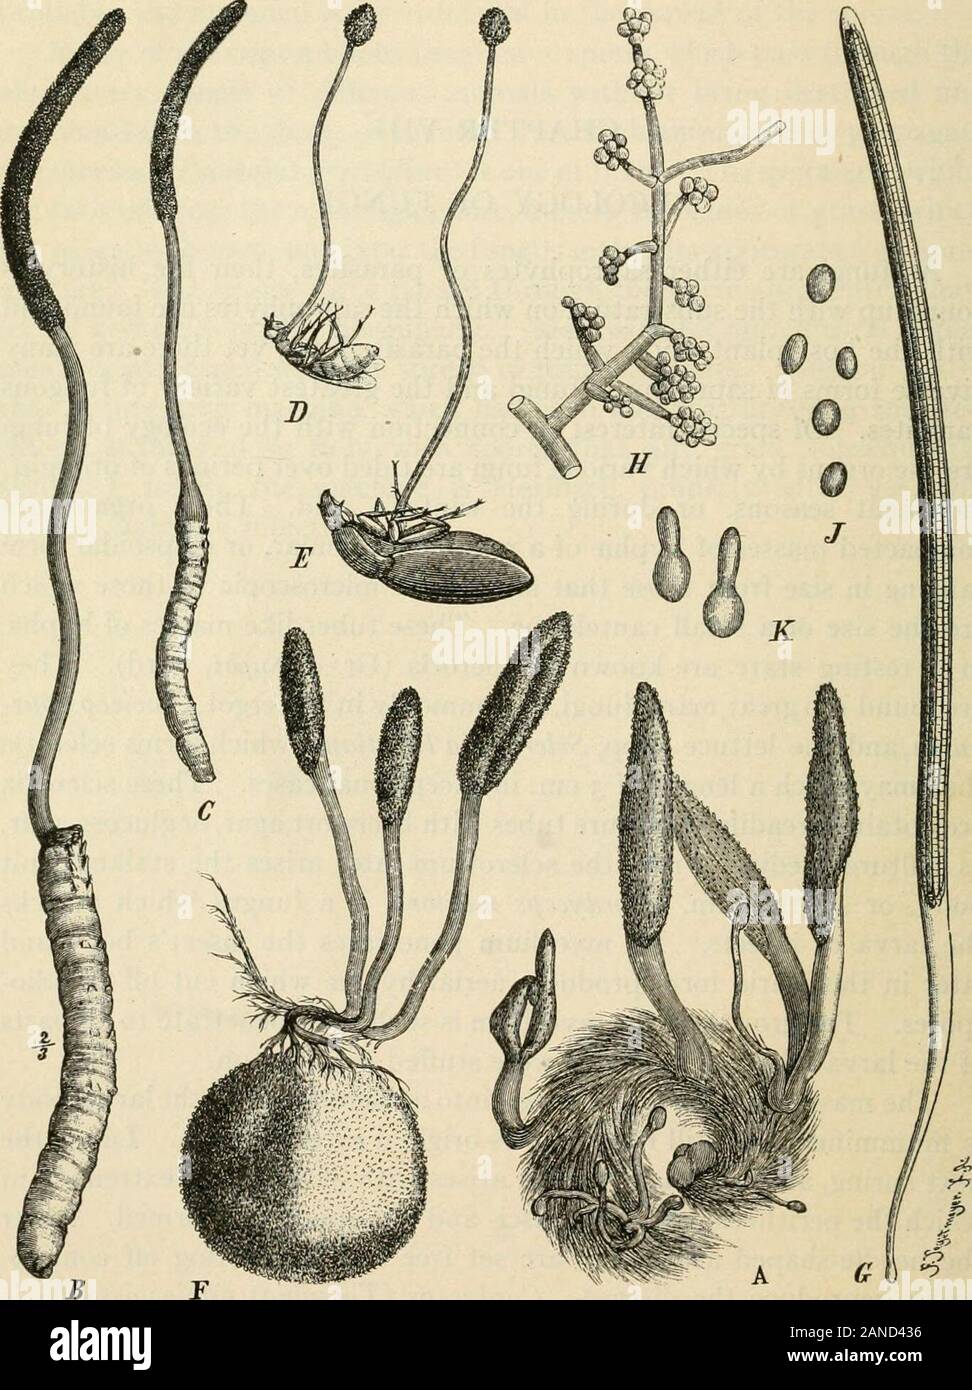 A text-book of mycology and plant pathology . s is a fungus which attacksthe larva of insects. Its mycelium penetrates the insects body andlater in the Isaria form produces aerial hyphae which cut off conidio-spores. The growth of the mycelium is such as to penetrate to all partsof the larva filUng it up as if it were stuffed with cotton. The mass of hyphae is converted into asclerotiumand the larval bodyis mummified, but still retaining its original external form. Later, thenext spring, a stiff-stalked stroma arises with an enlarged extremity inwhich the perithecia with their asci- and ascosp Stock Photo